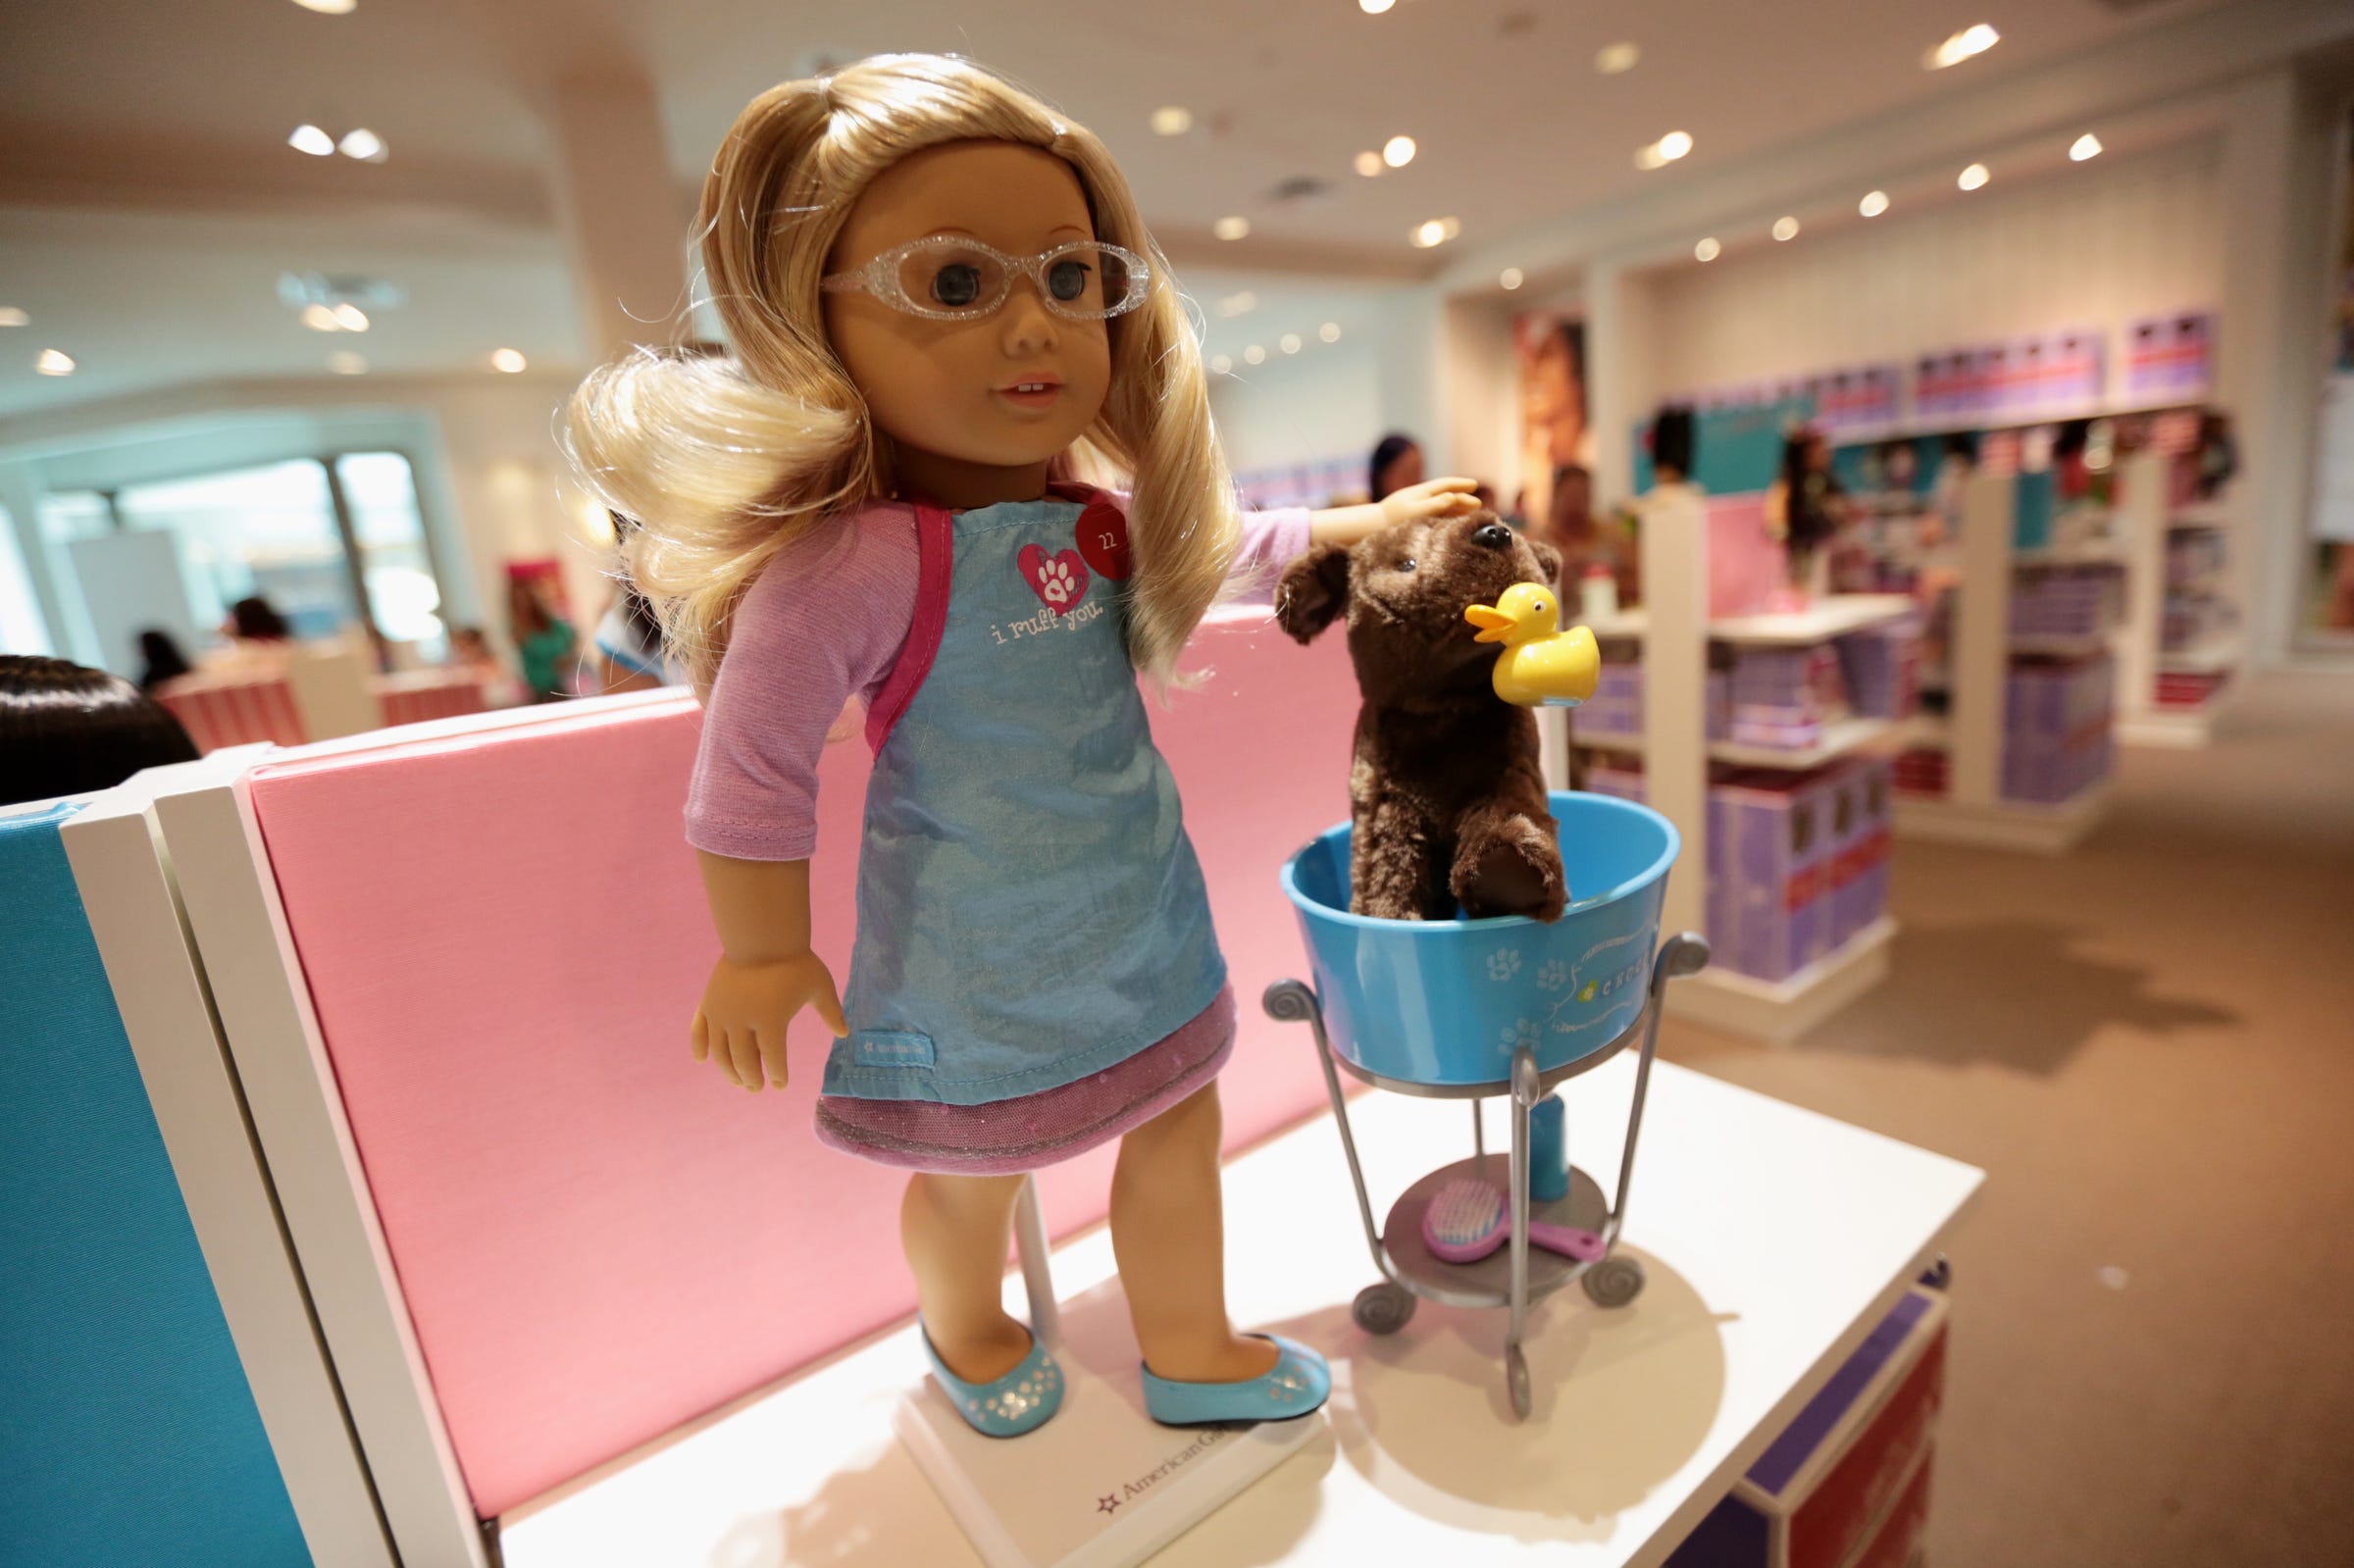 stores that sell american girl products